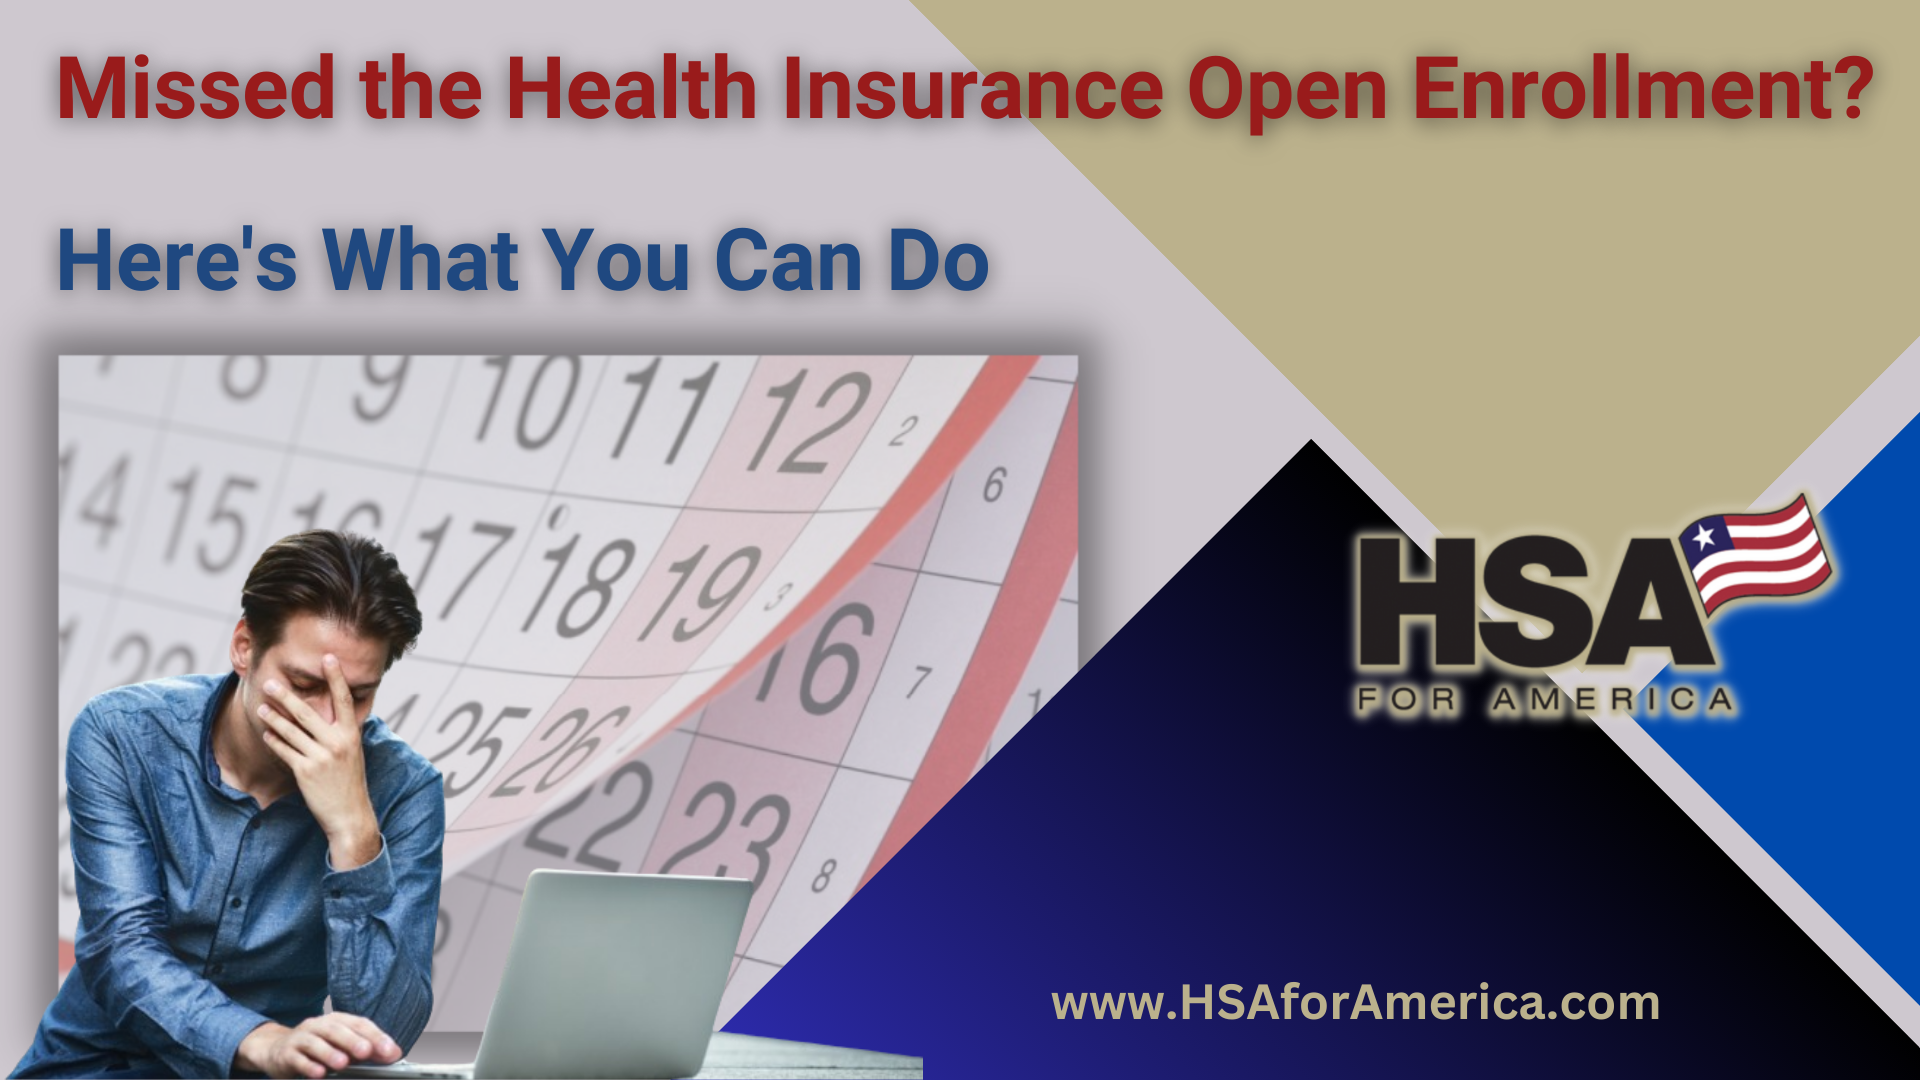 Missed Health Insurance Open Enrollment Period? You Still Have Options!